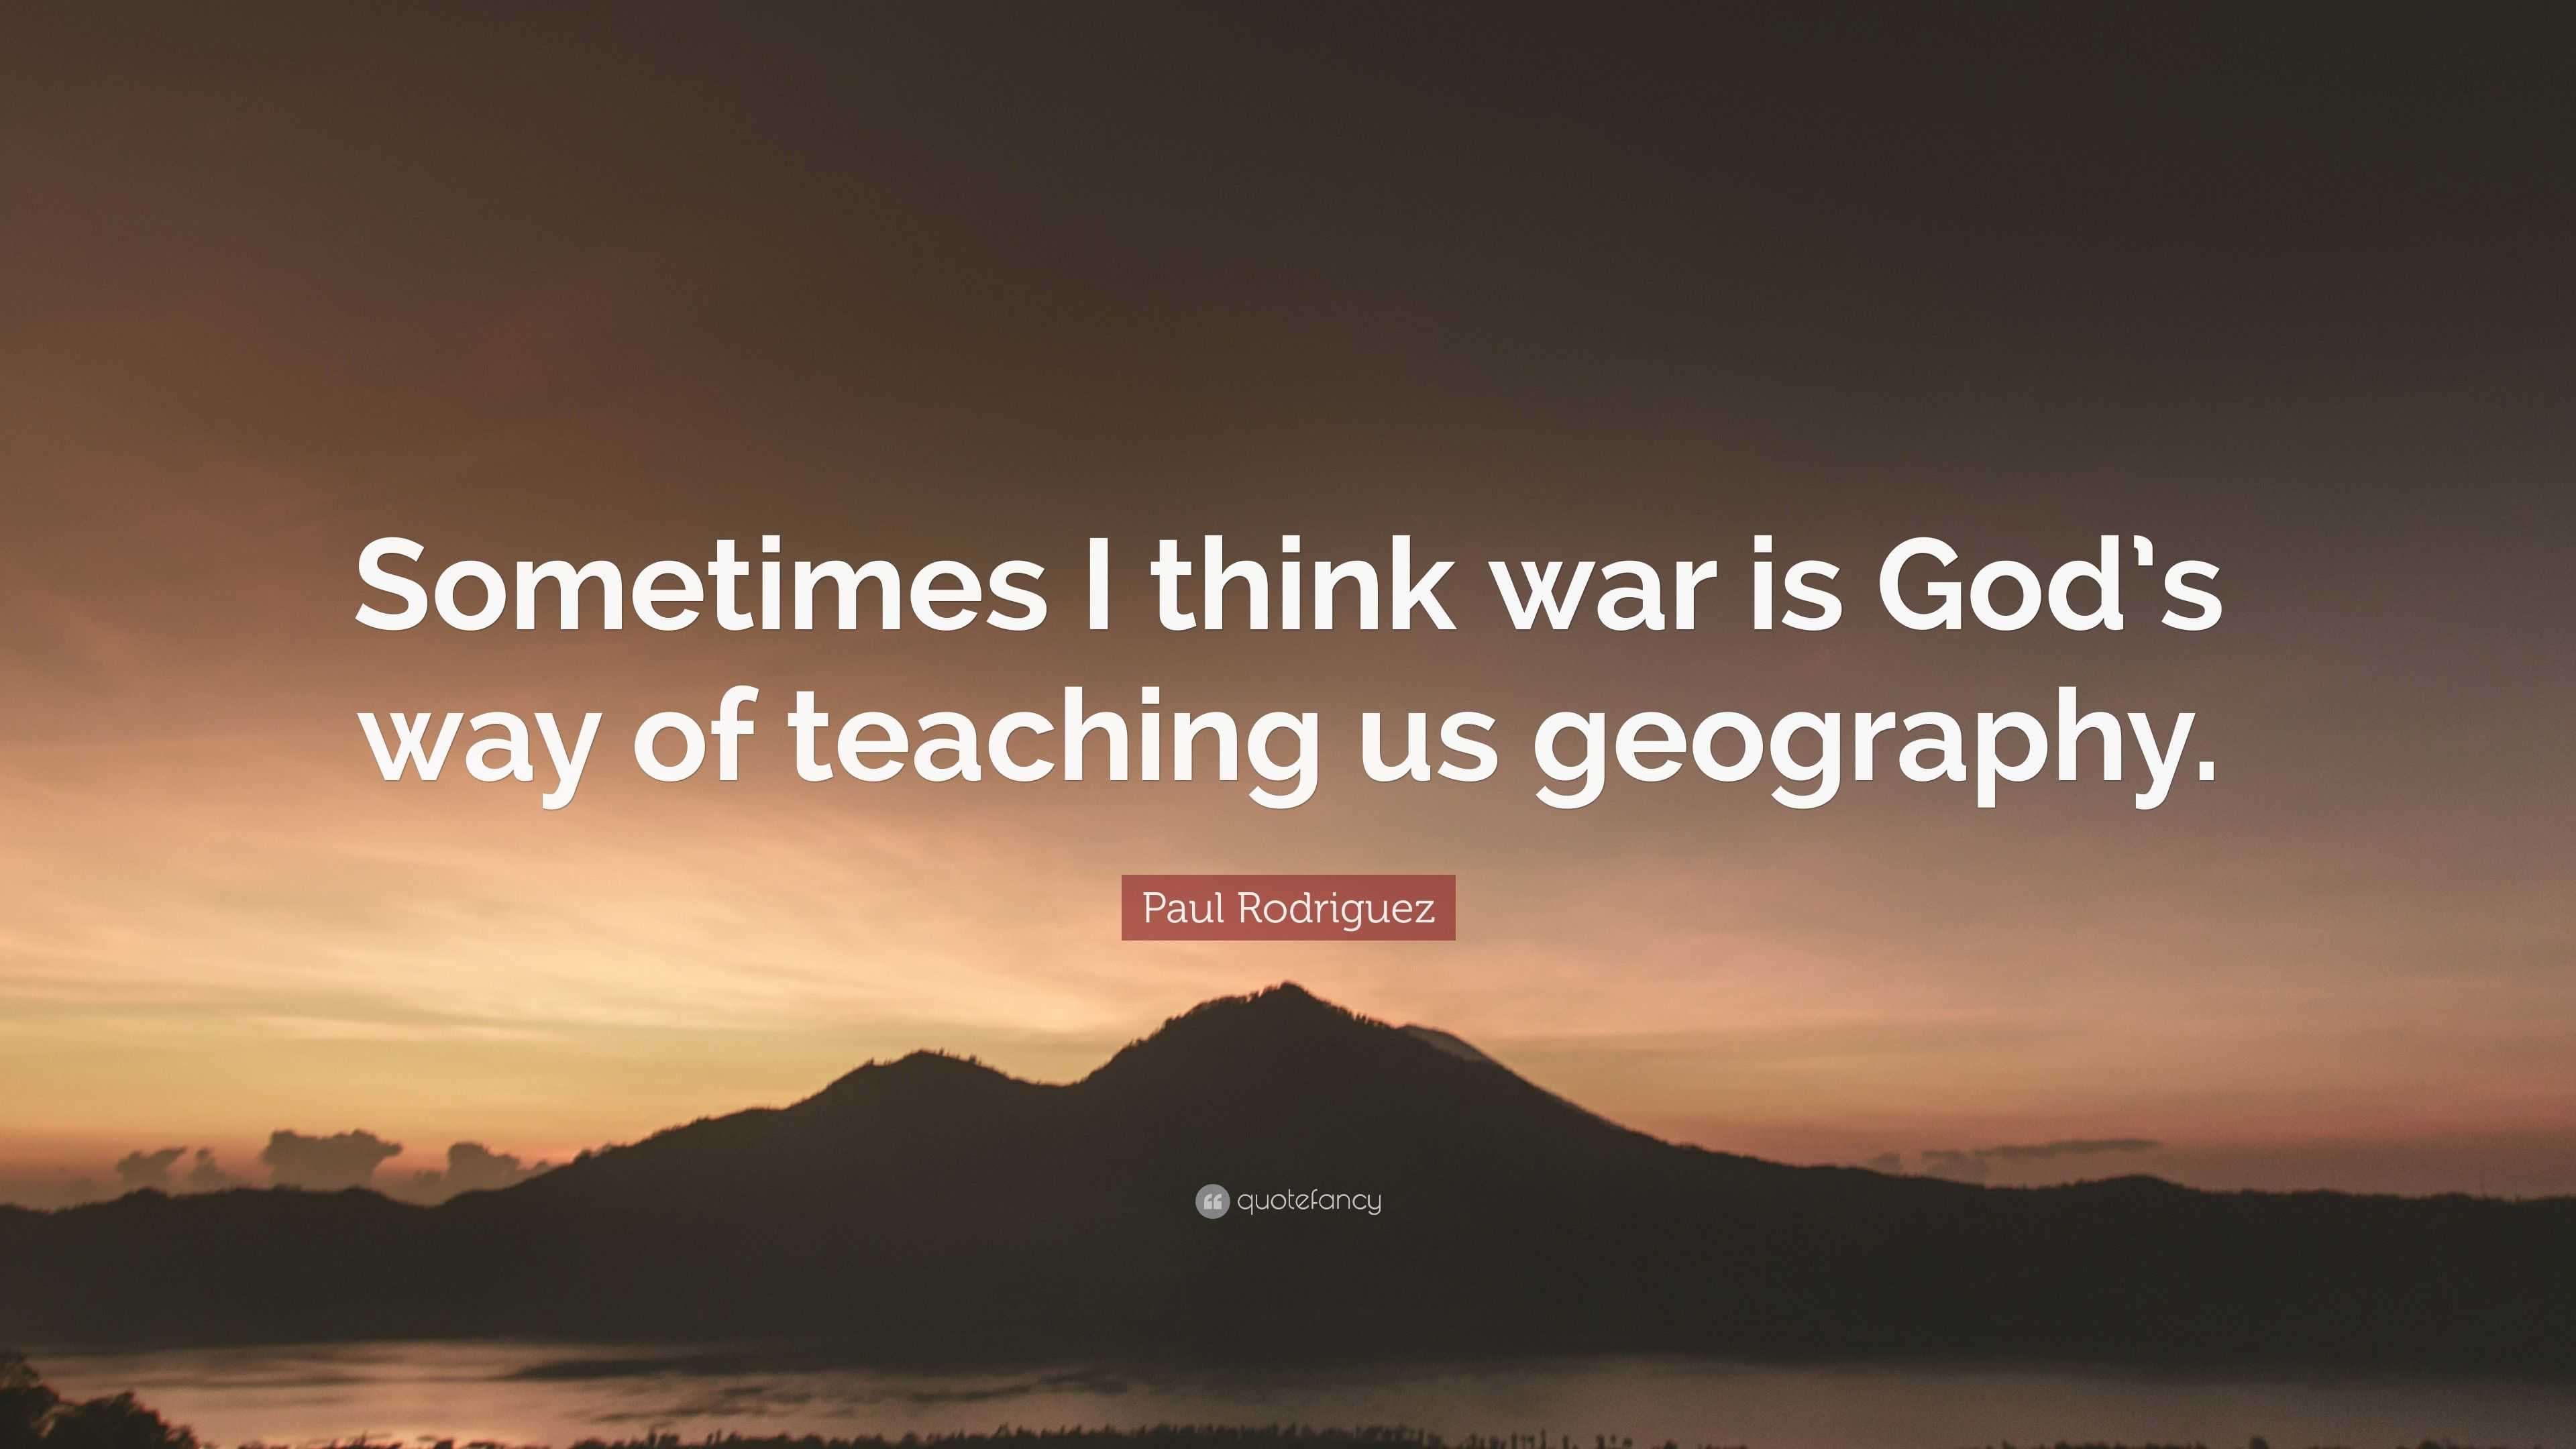 Paul Rodriguez Quote: “Sometimes I think war is God’s way of teaching